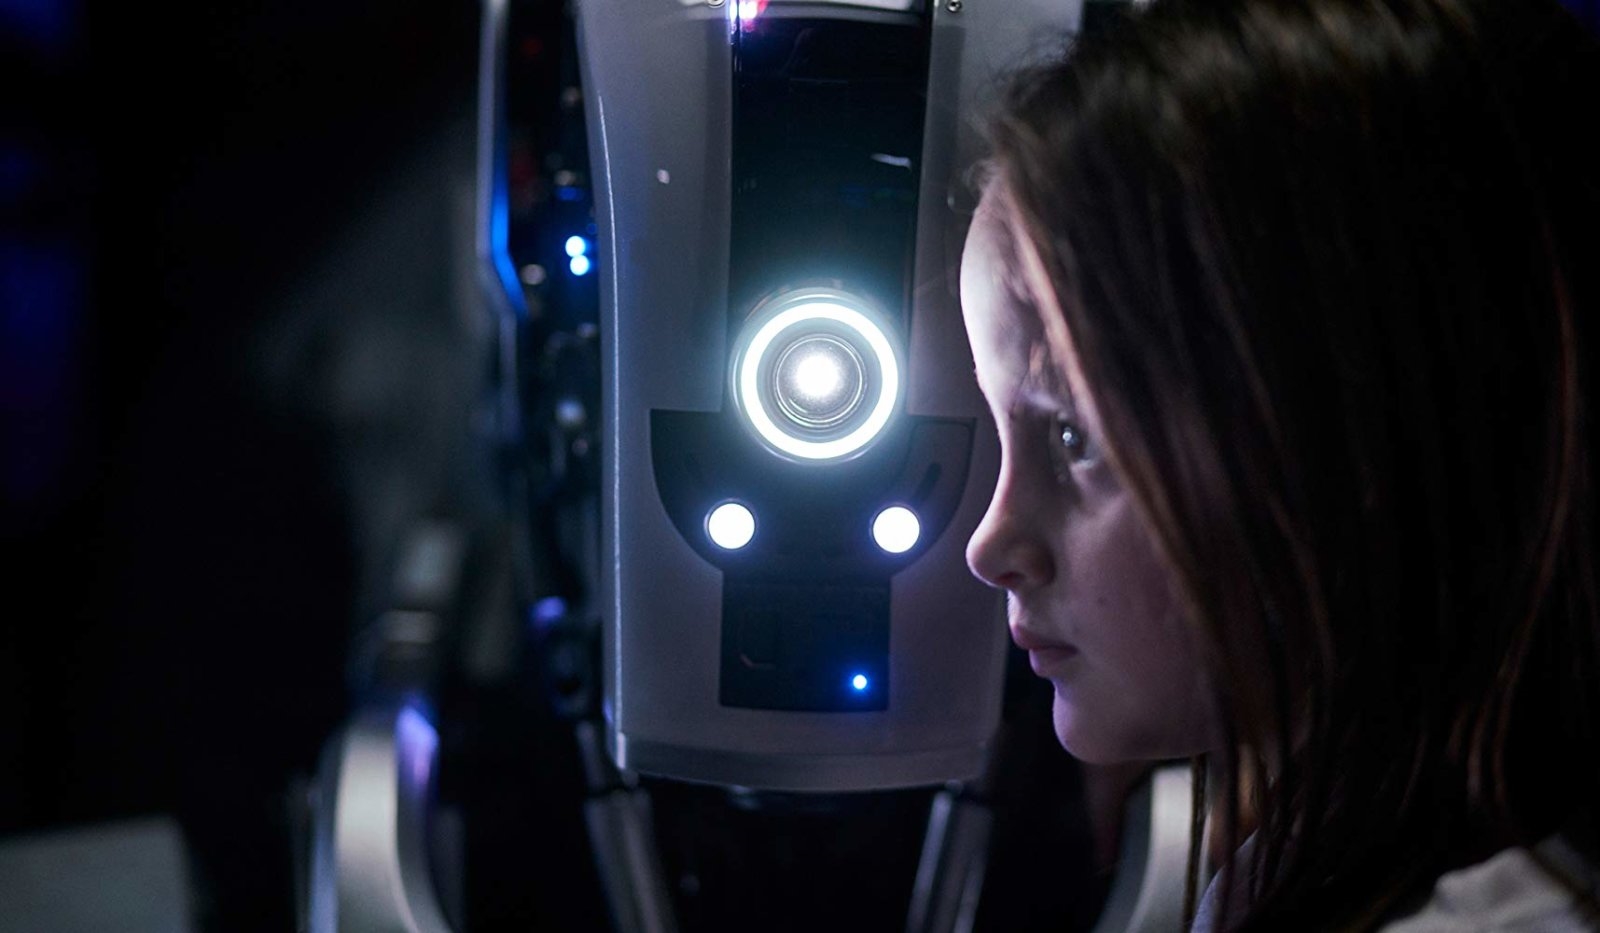 Netflix streams sci-fi thriller 'I Am Mother' on June 7th | DeviceDaily.com